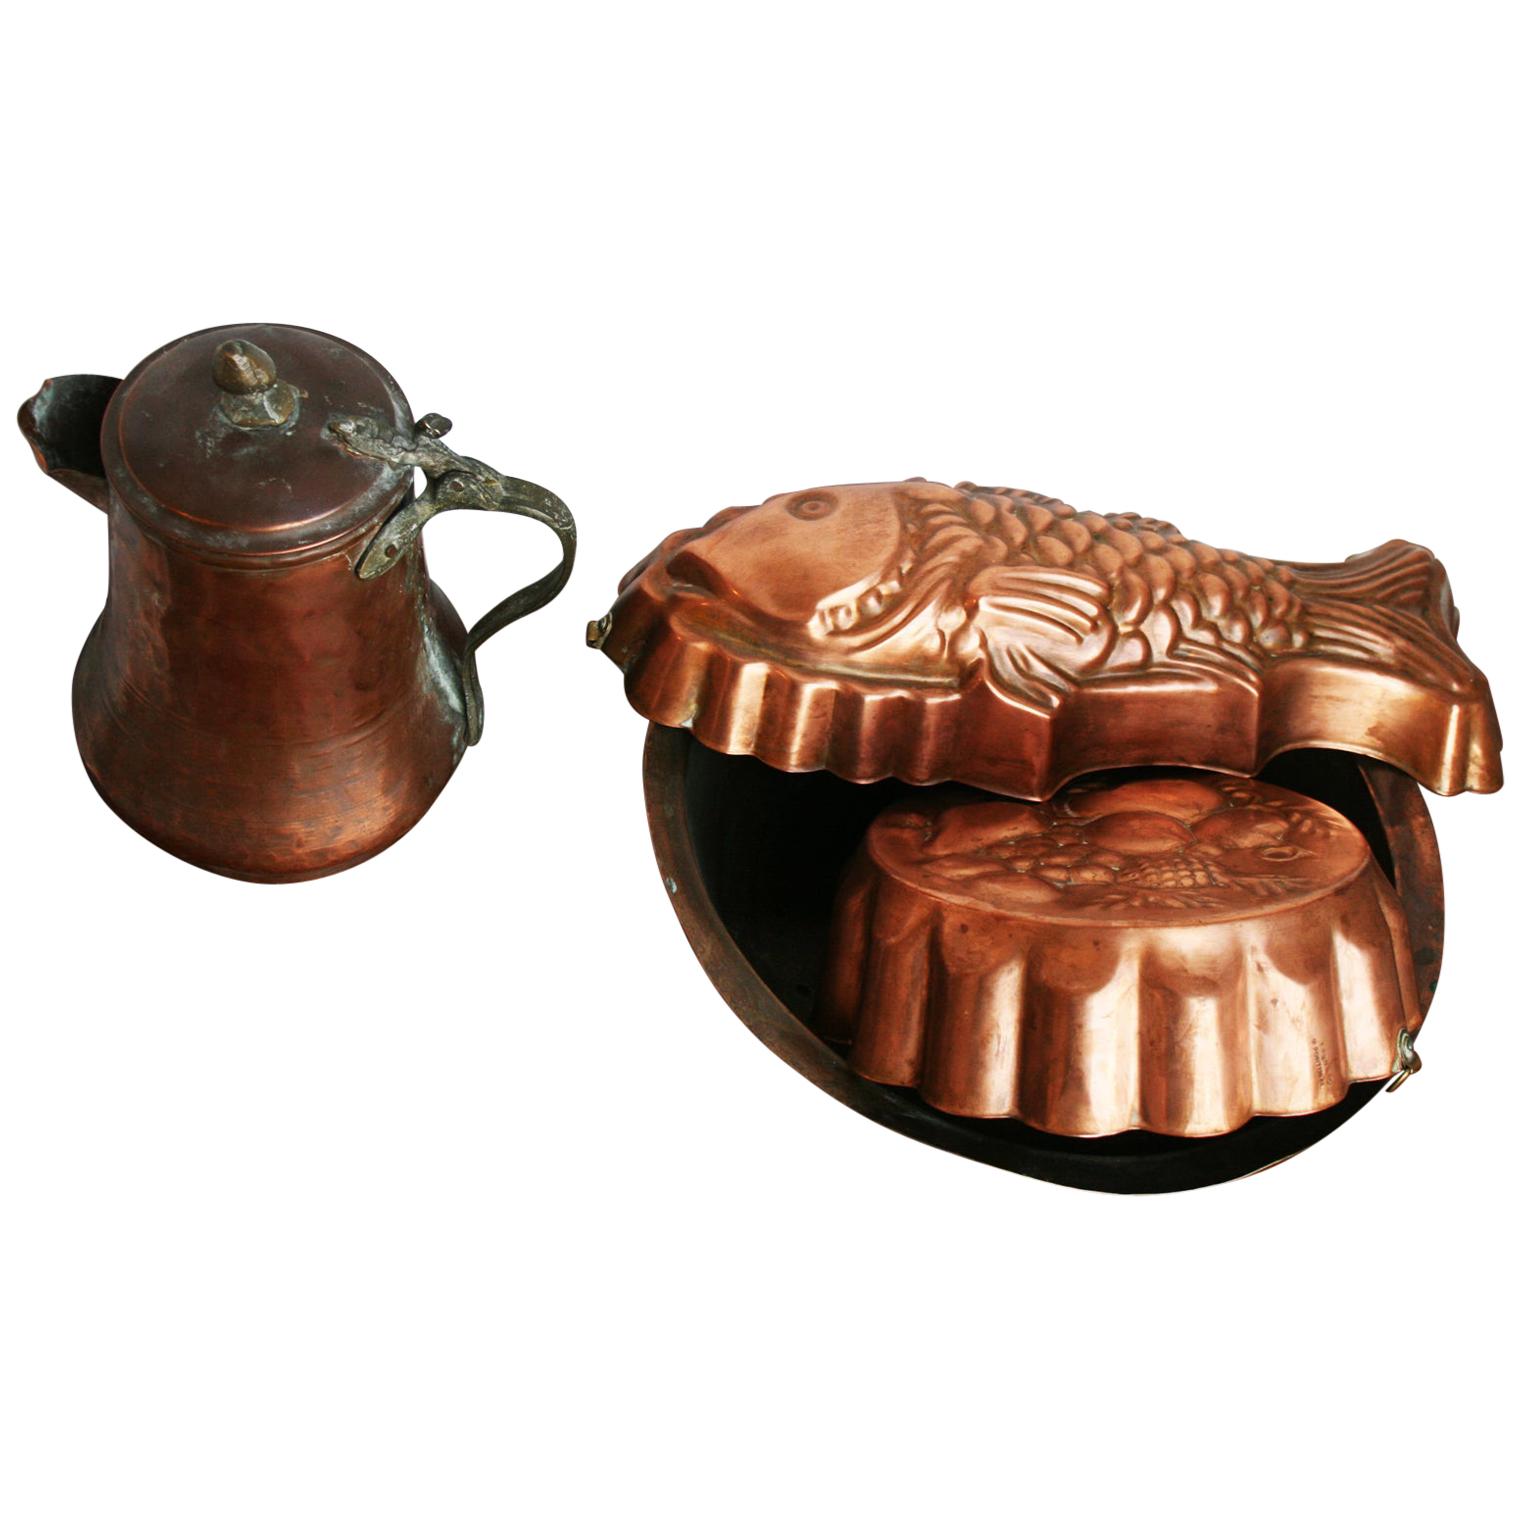 Lot Old Copper Molds and Utensils to Decorate Your Kitchen 2